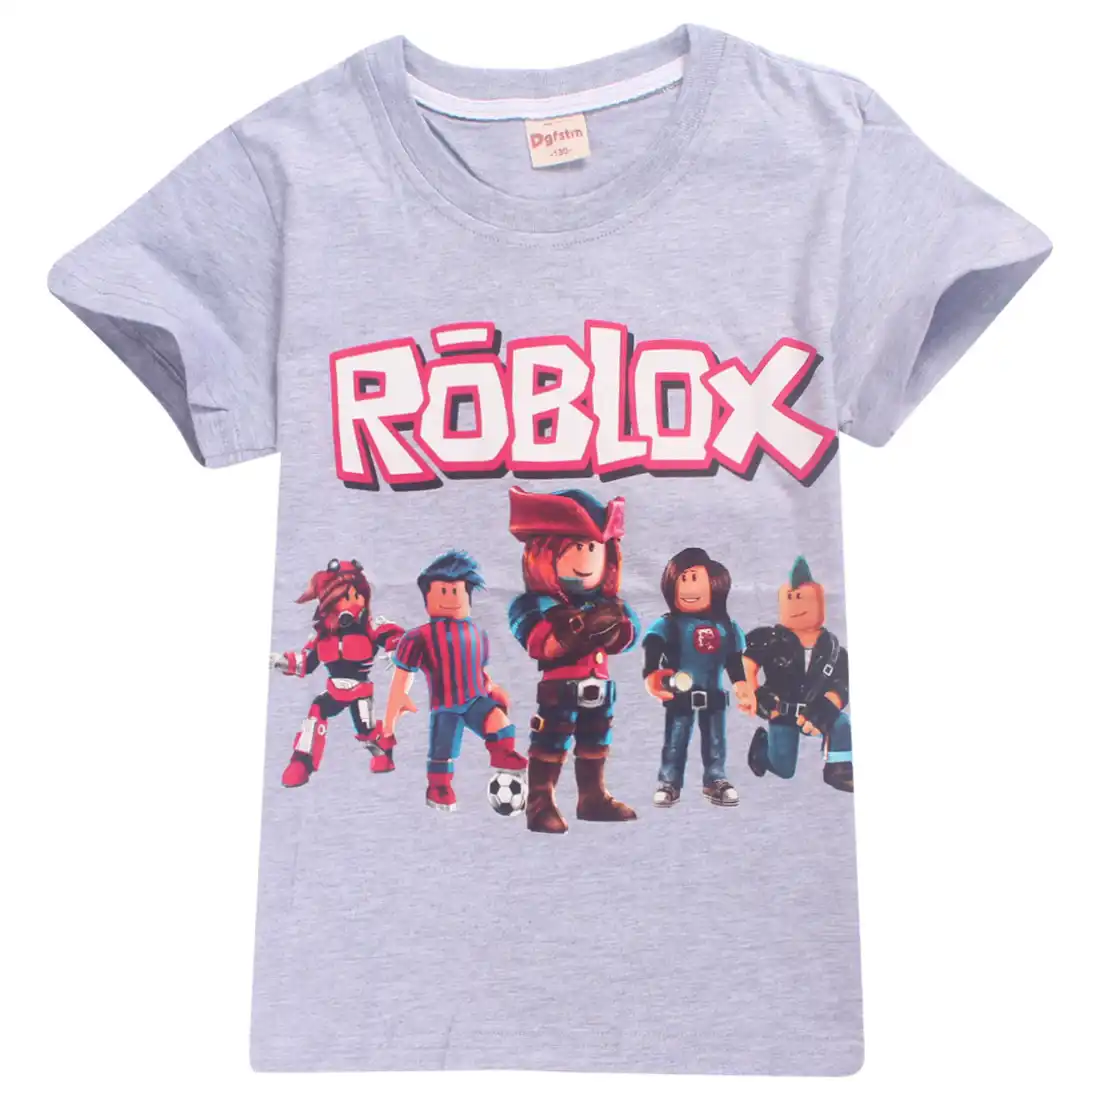 How To Get Free Shirts And Pants On Roblox 2019 Nils Stucki - how to get free shirts and pants on roblox 2019